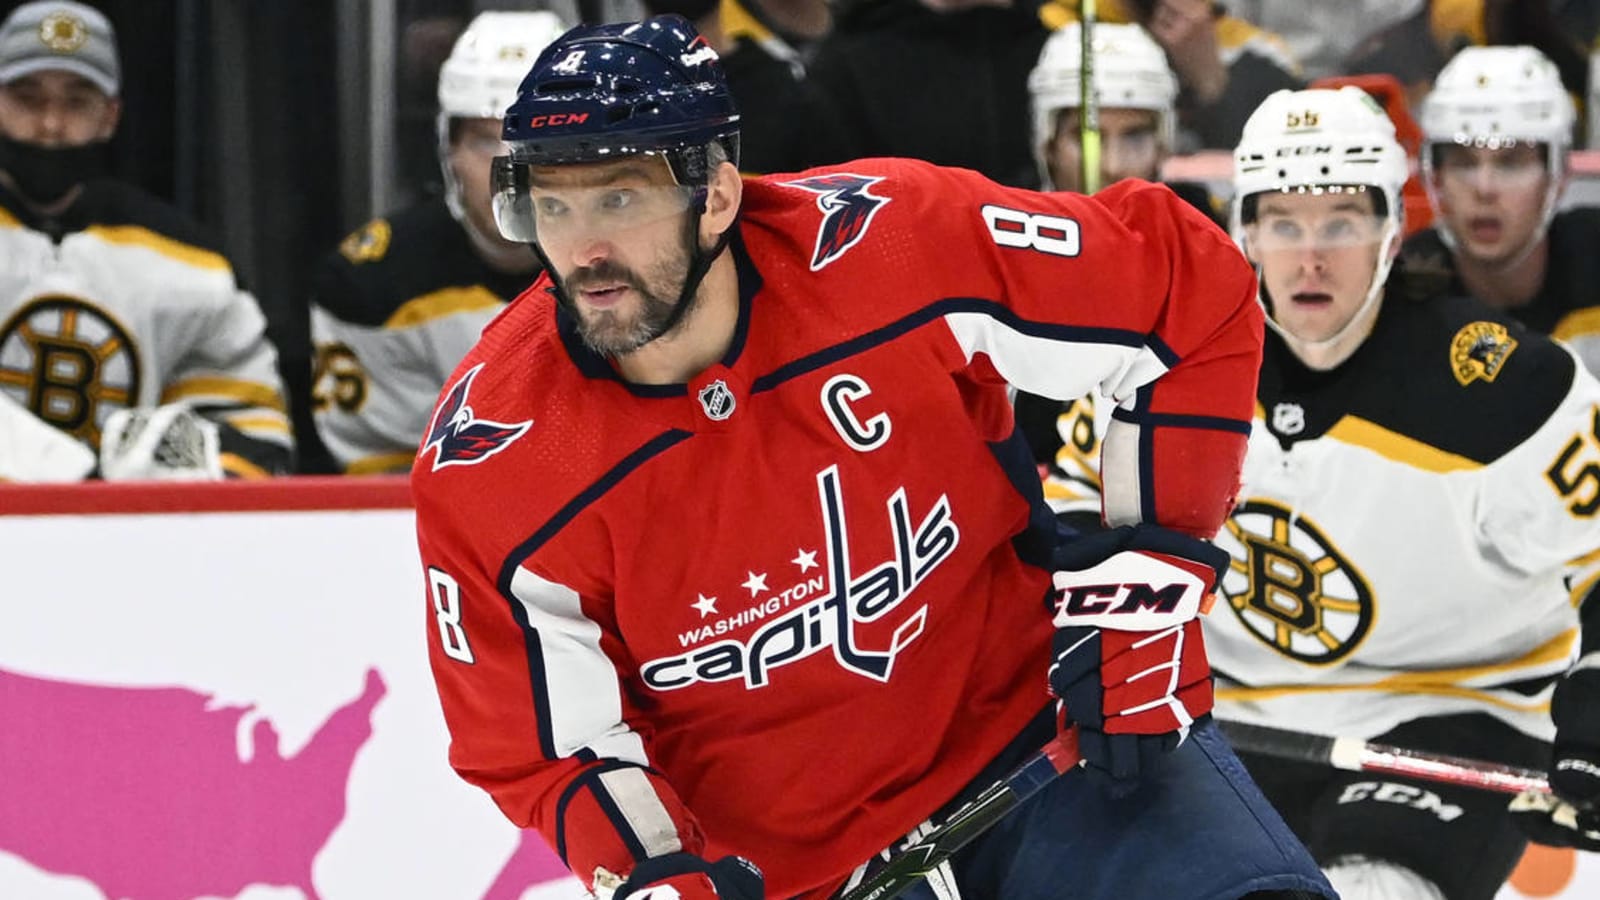 Ovechkin returns to practice, hopes to play Saturday vs. Isles